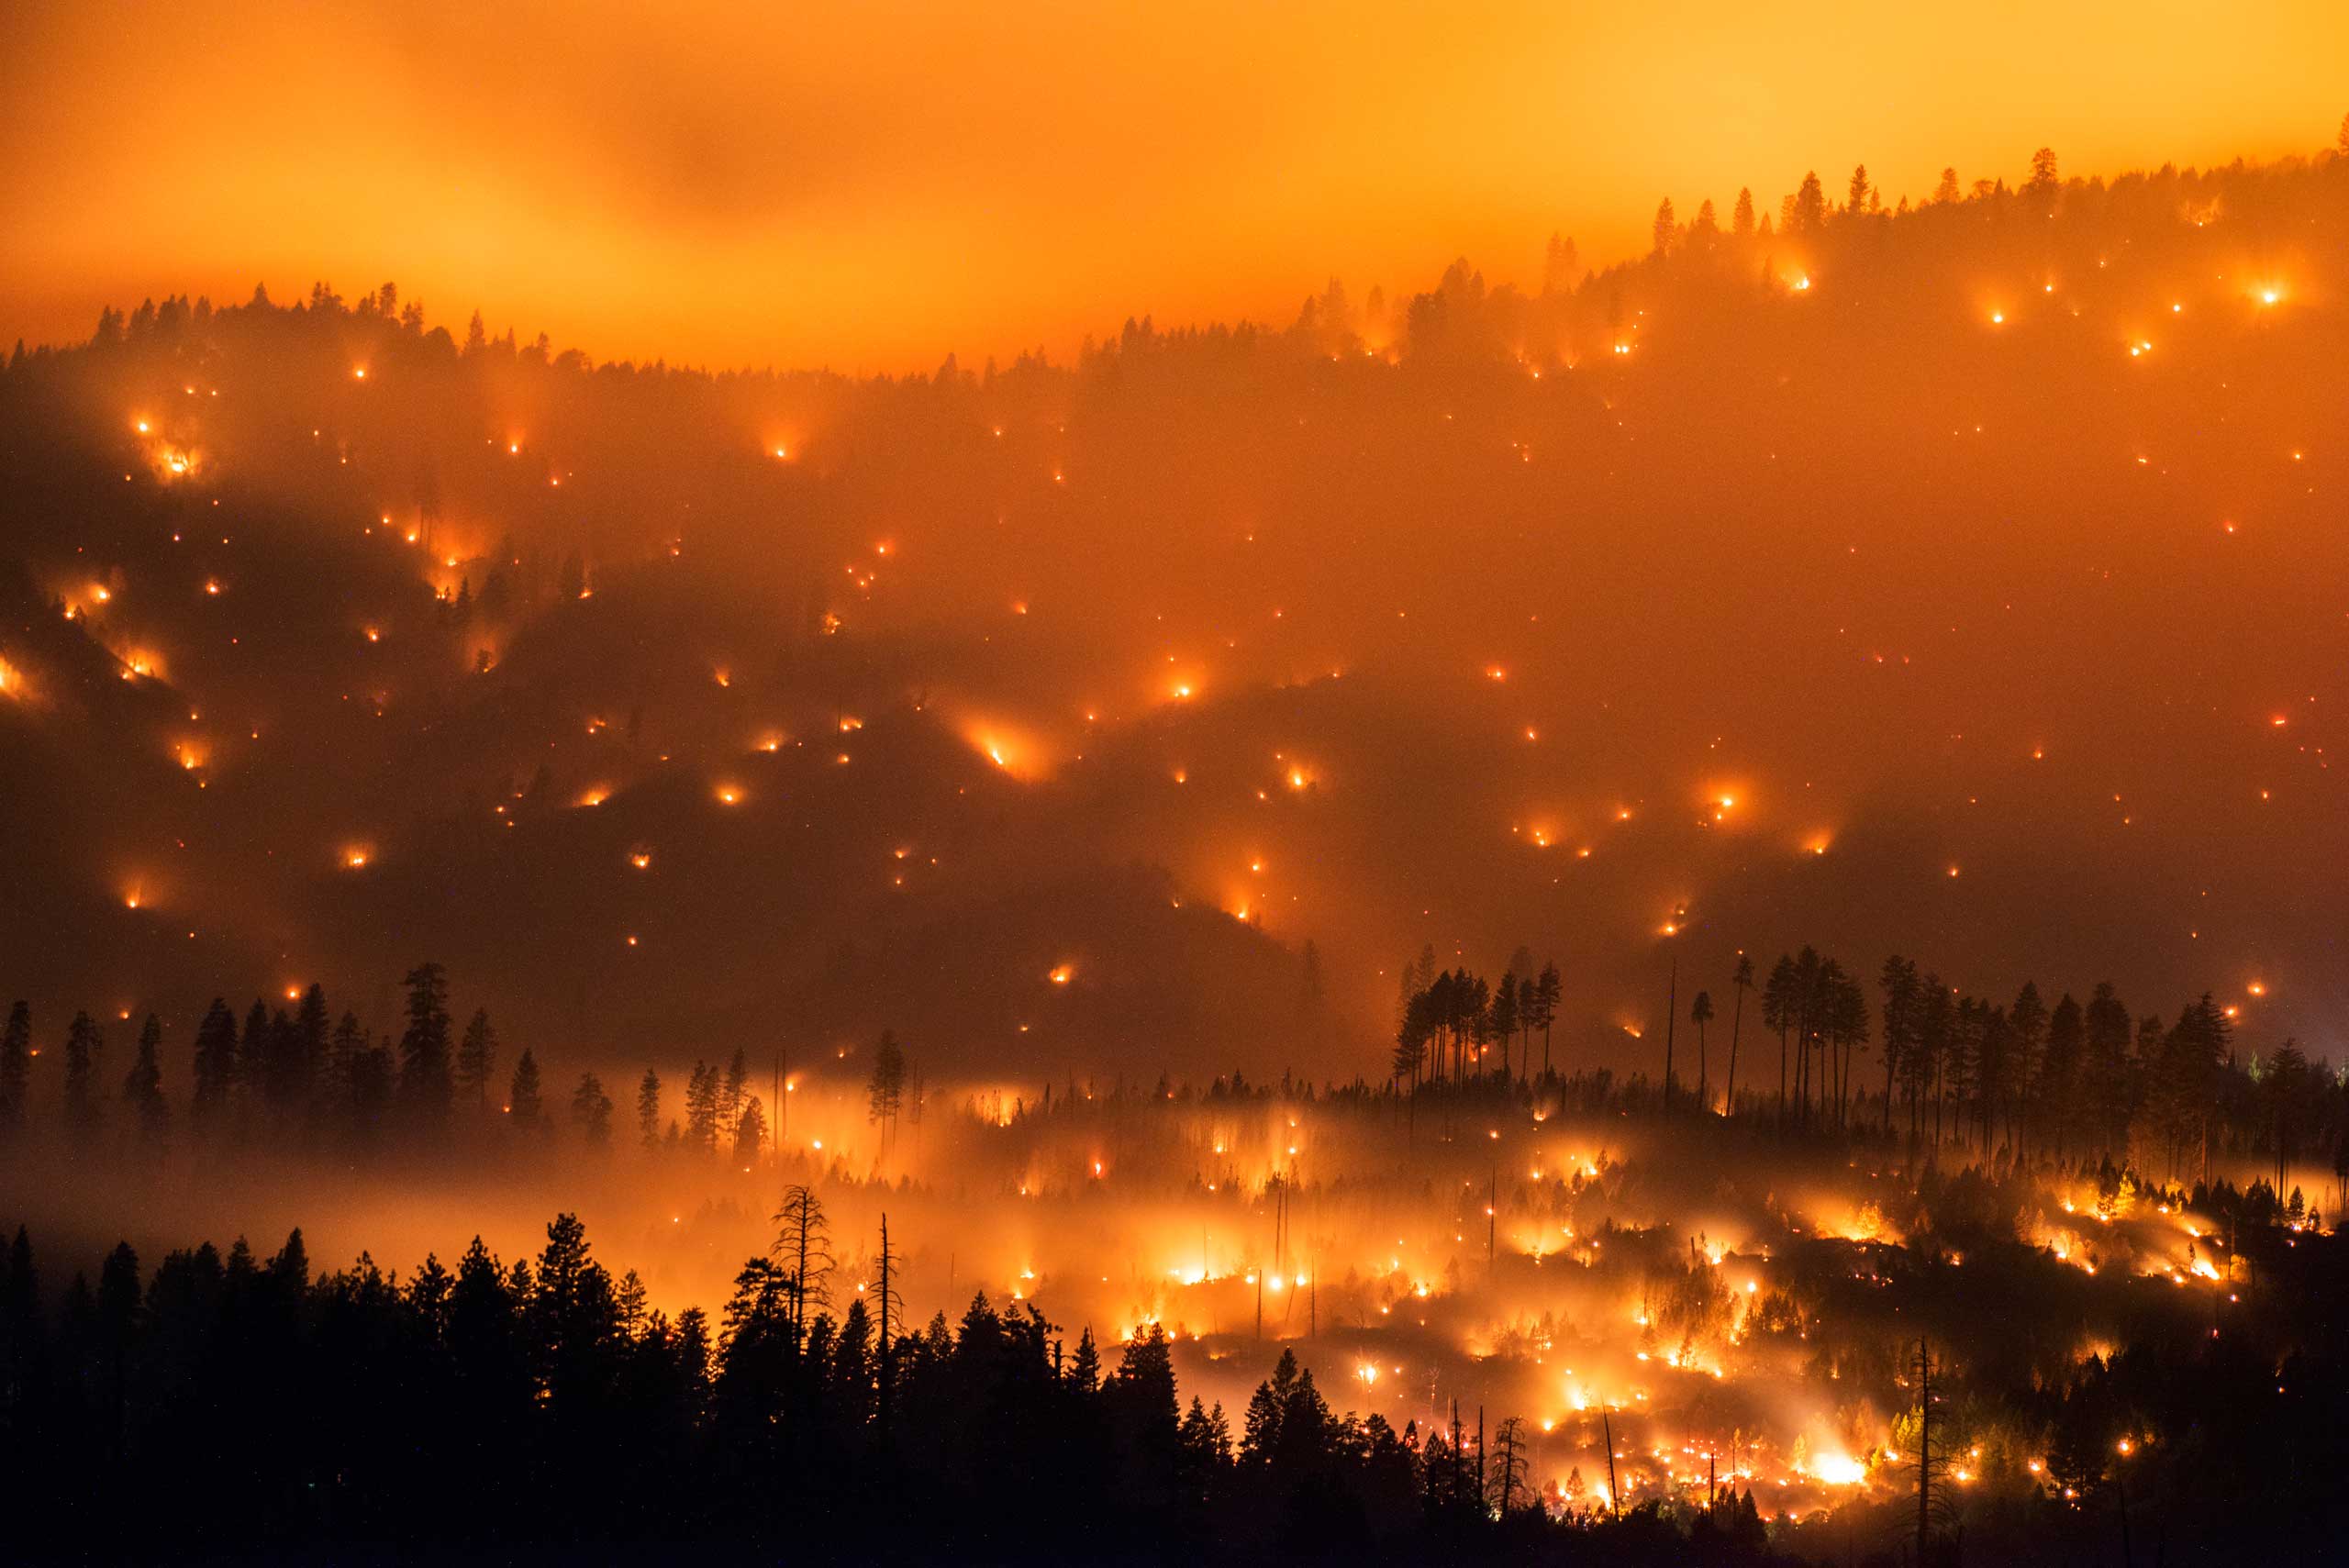 The El Portal Fire burns on a hillside  in the Stanislaus National Forest and Yosemite National Park on Sunday evening July 27, 2014.